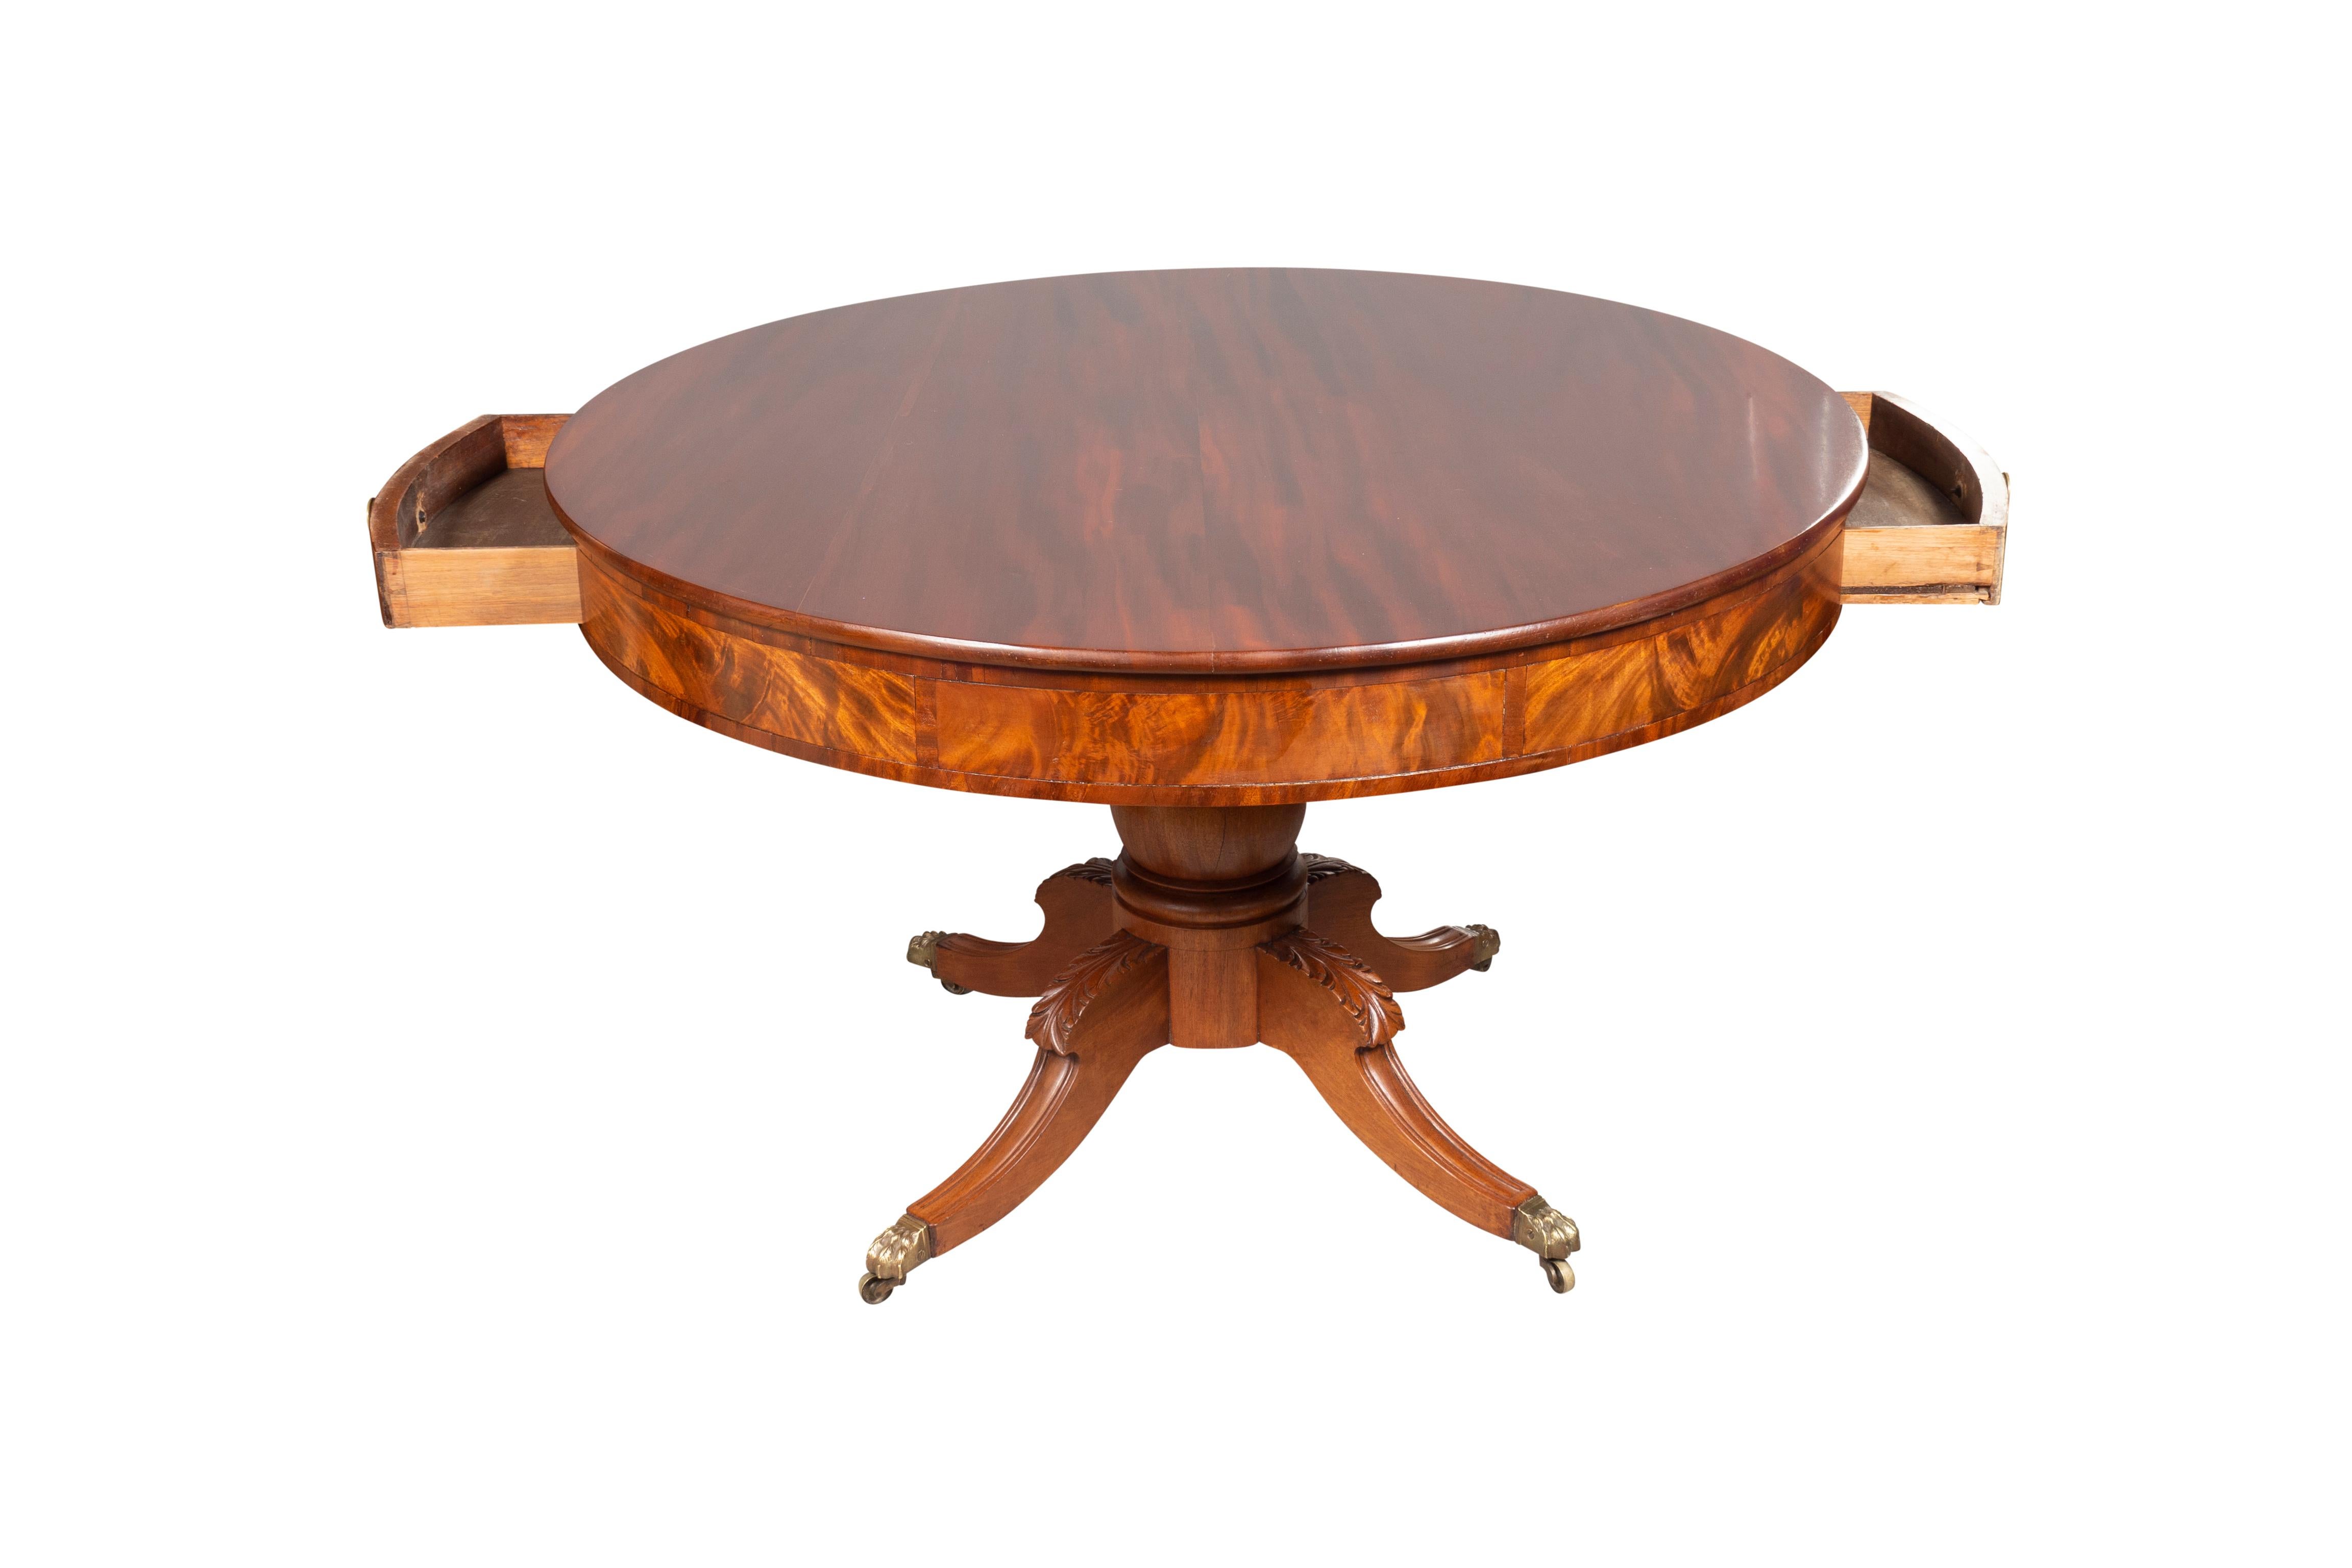 Early 19th Century American Classical Mahogany Drum Table For Sale